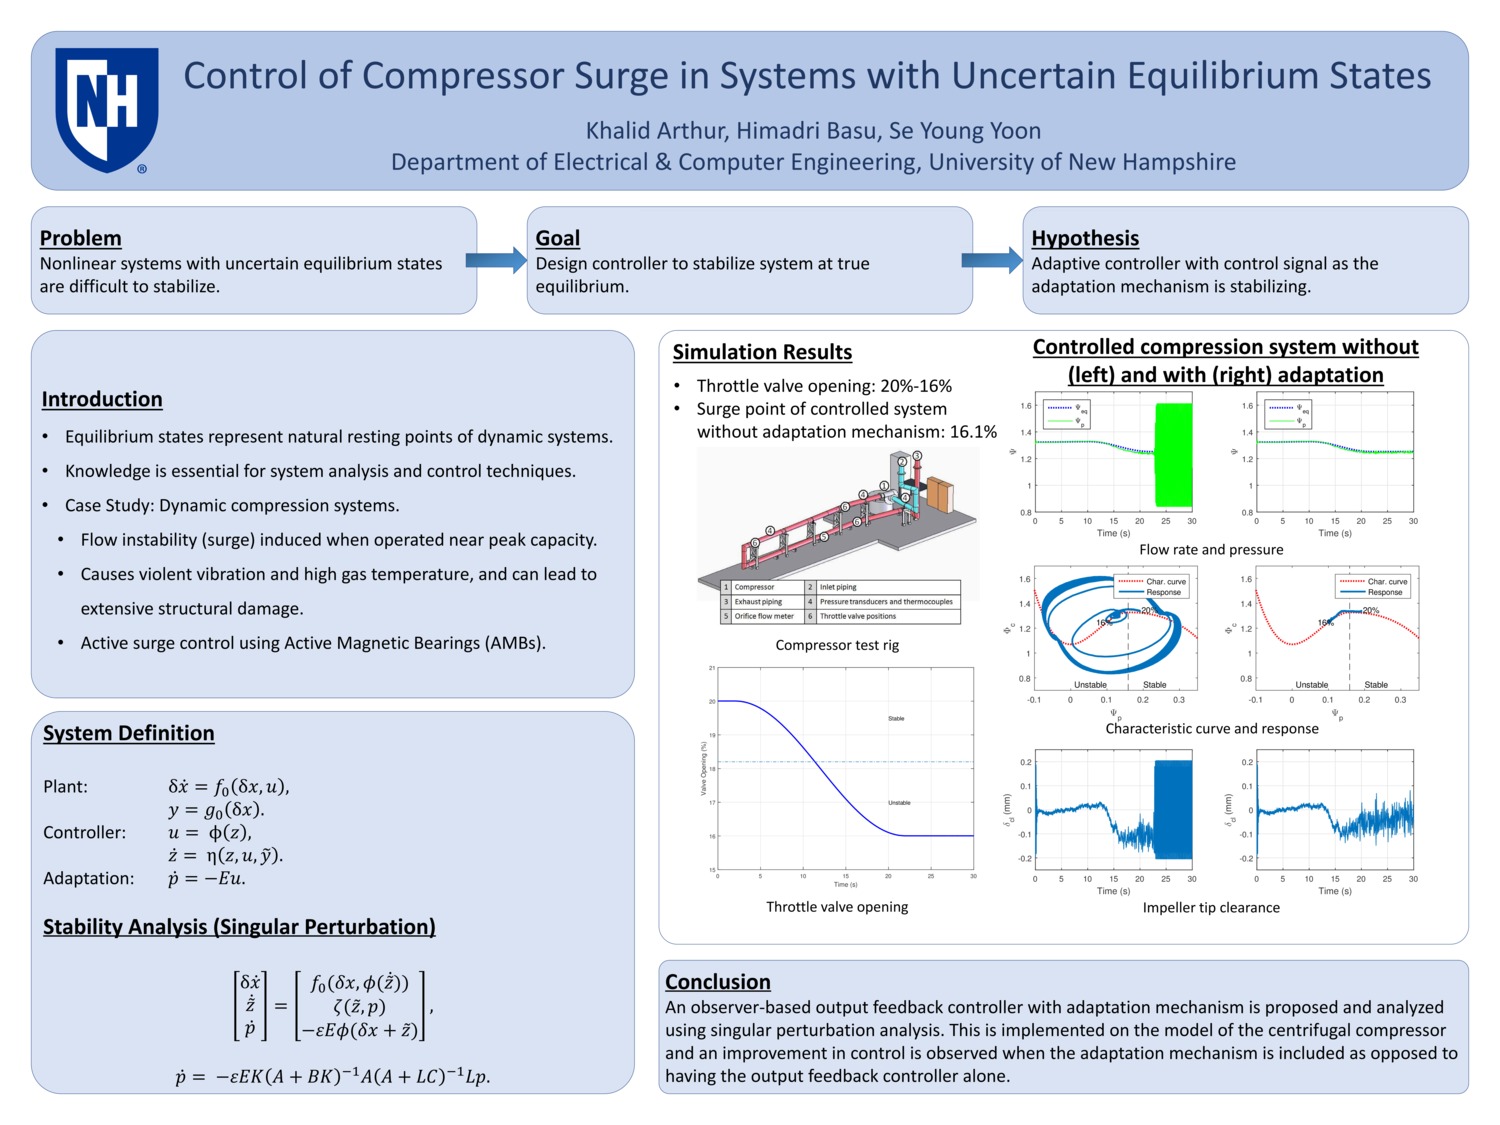 Control Of Compressor Surge In Systems With Uncertain Equilibrium States by khalid12